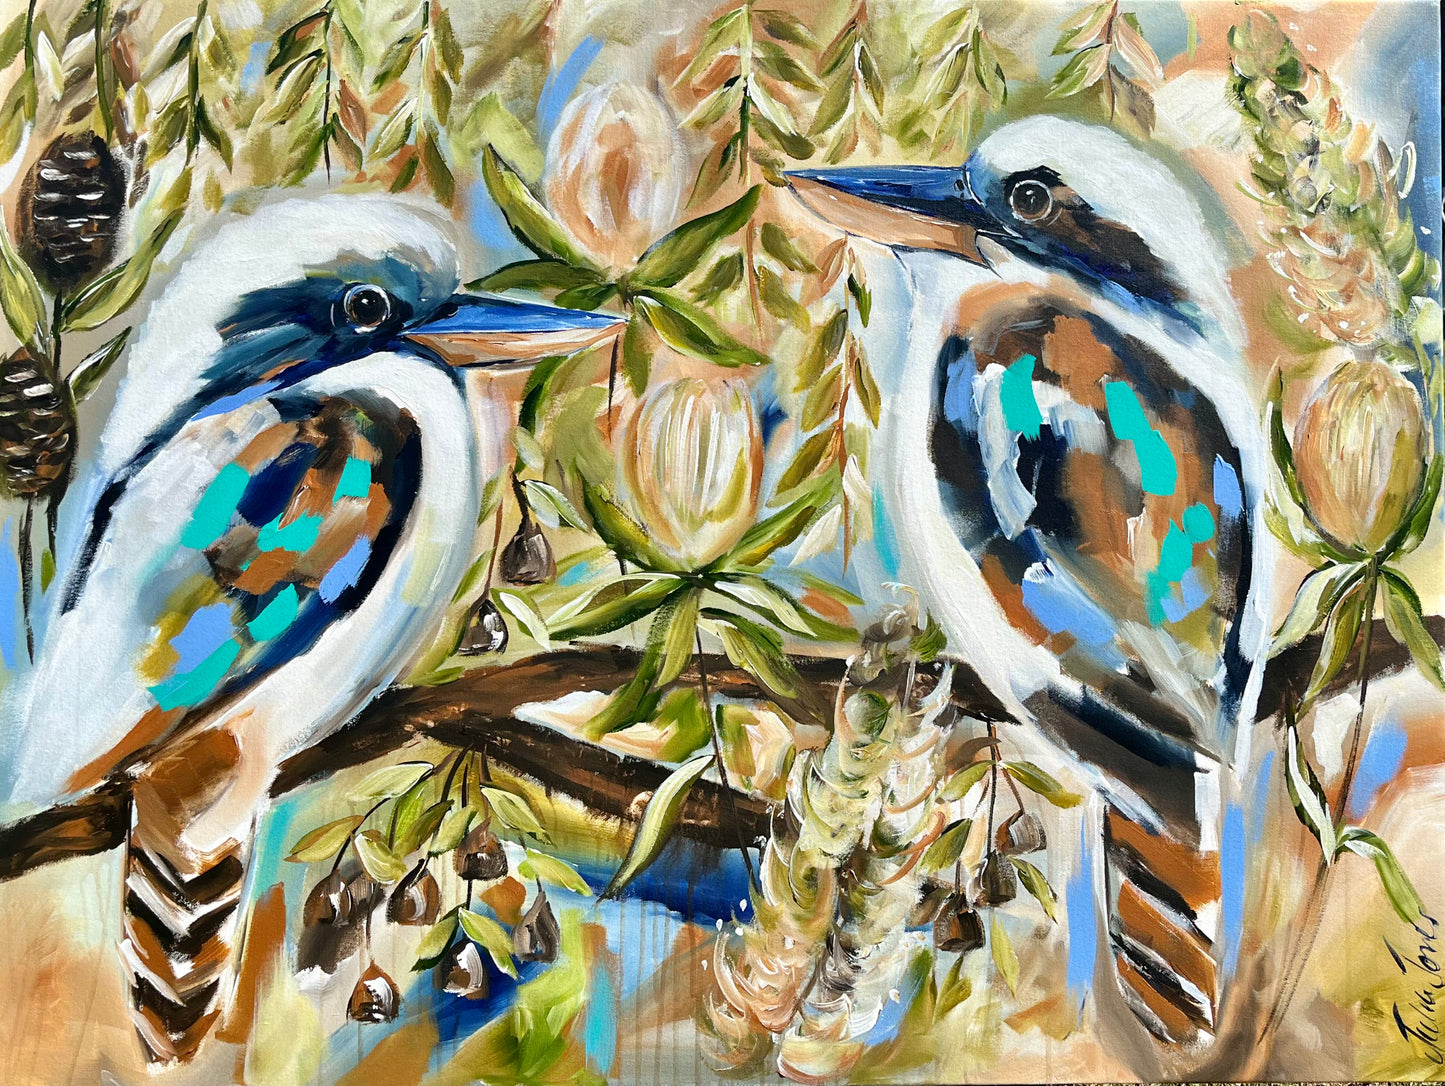 When the Kookaburra sings - 1.2x900 - Original Artwork available by commission